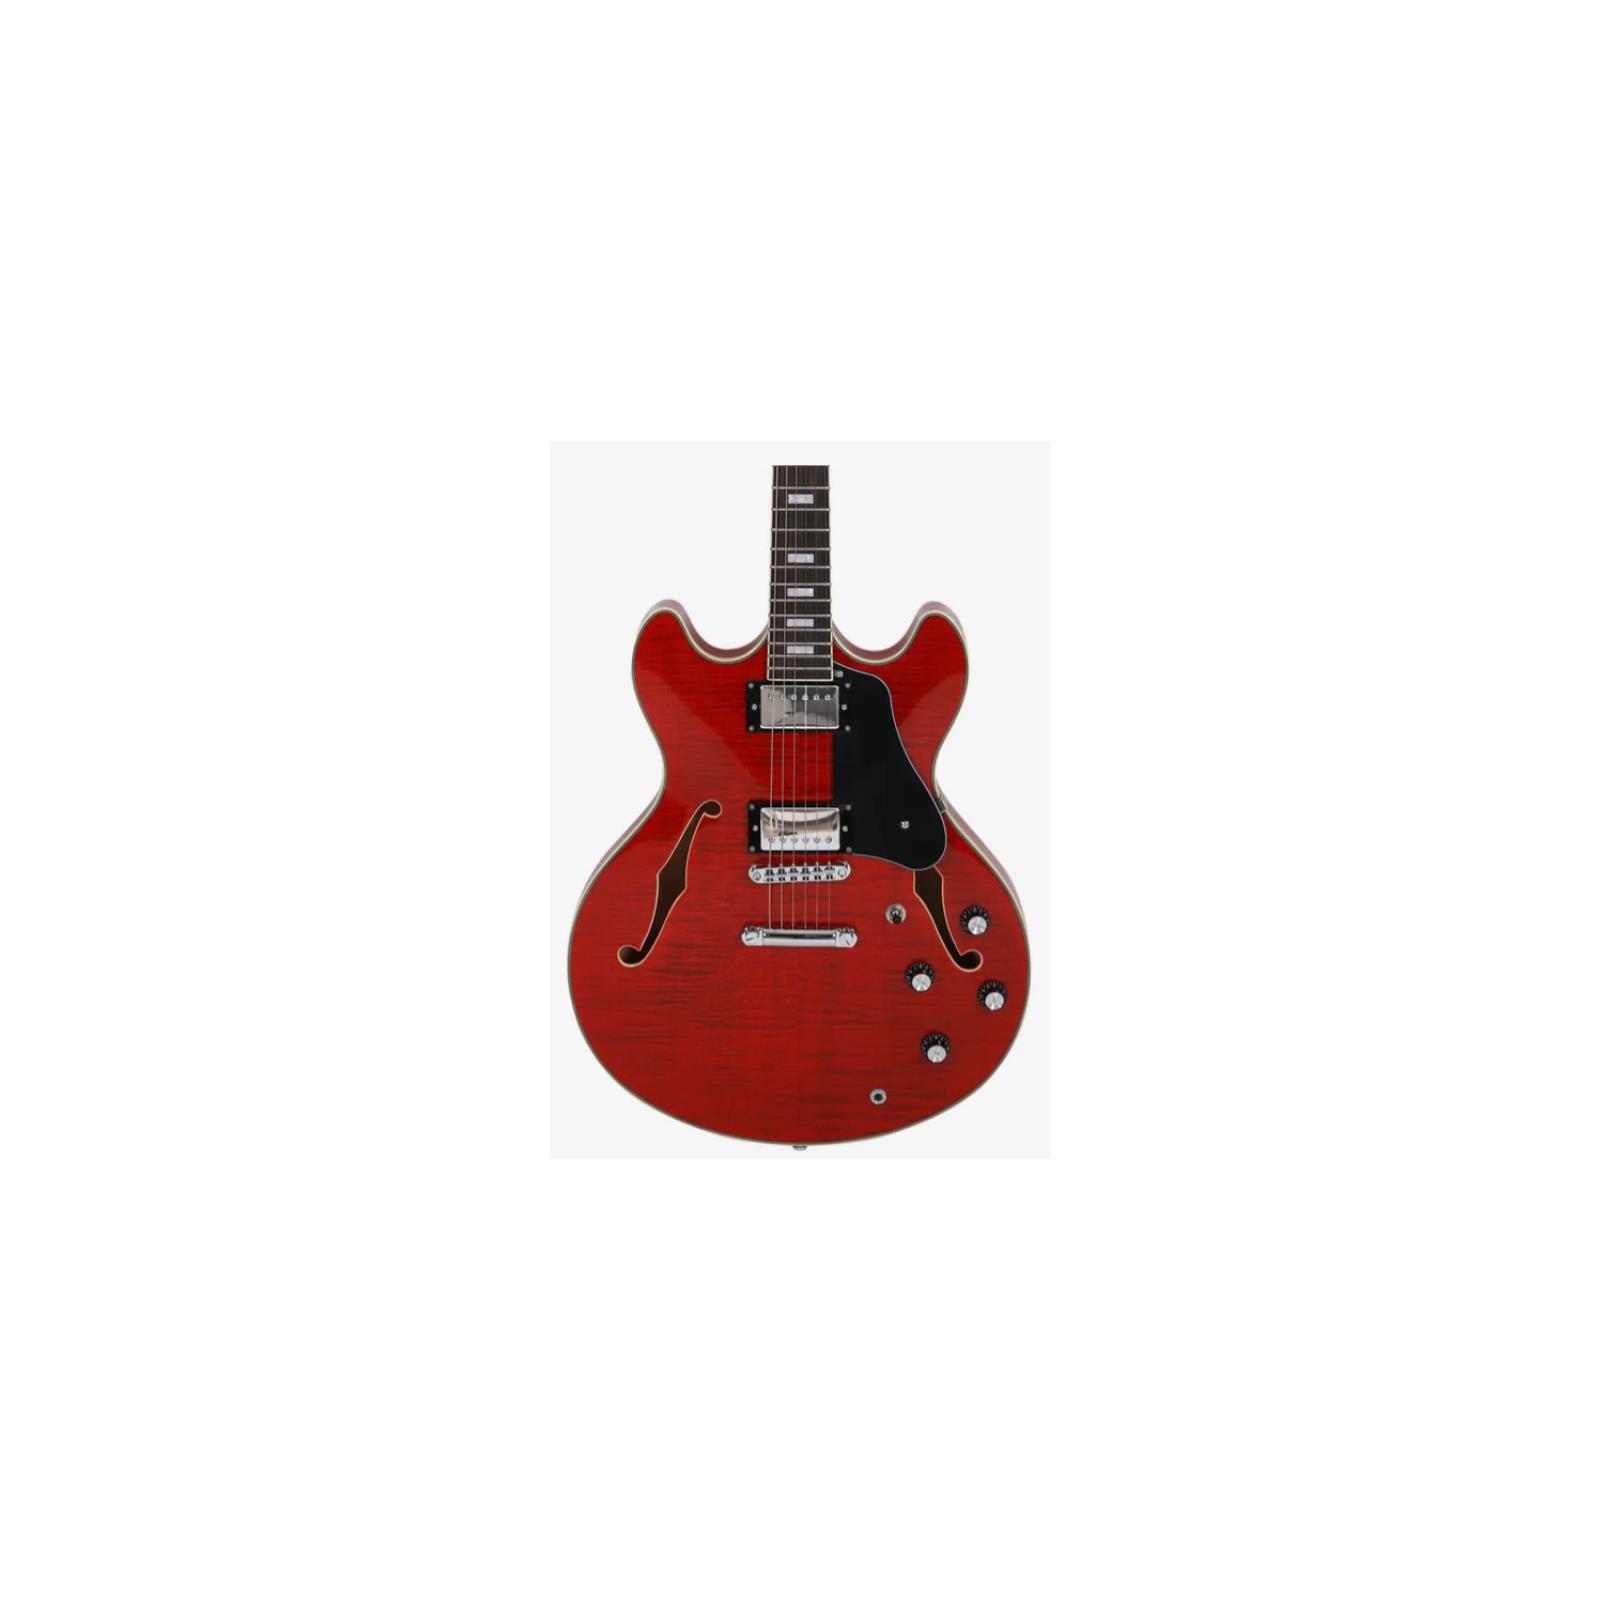 Sire H7 "35" See Through Red Hollowbody